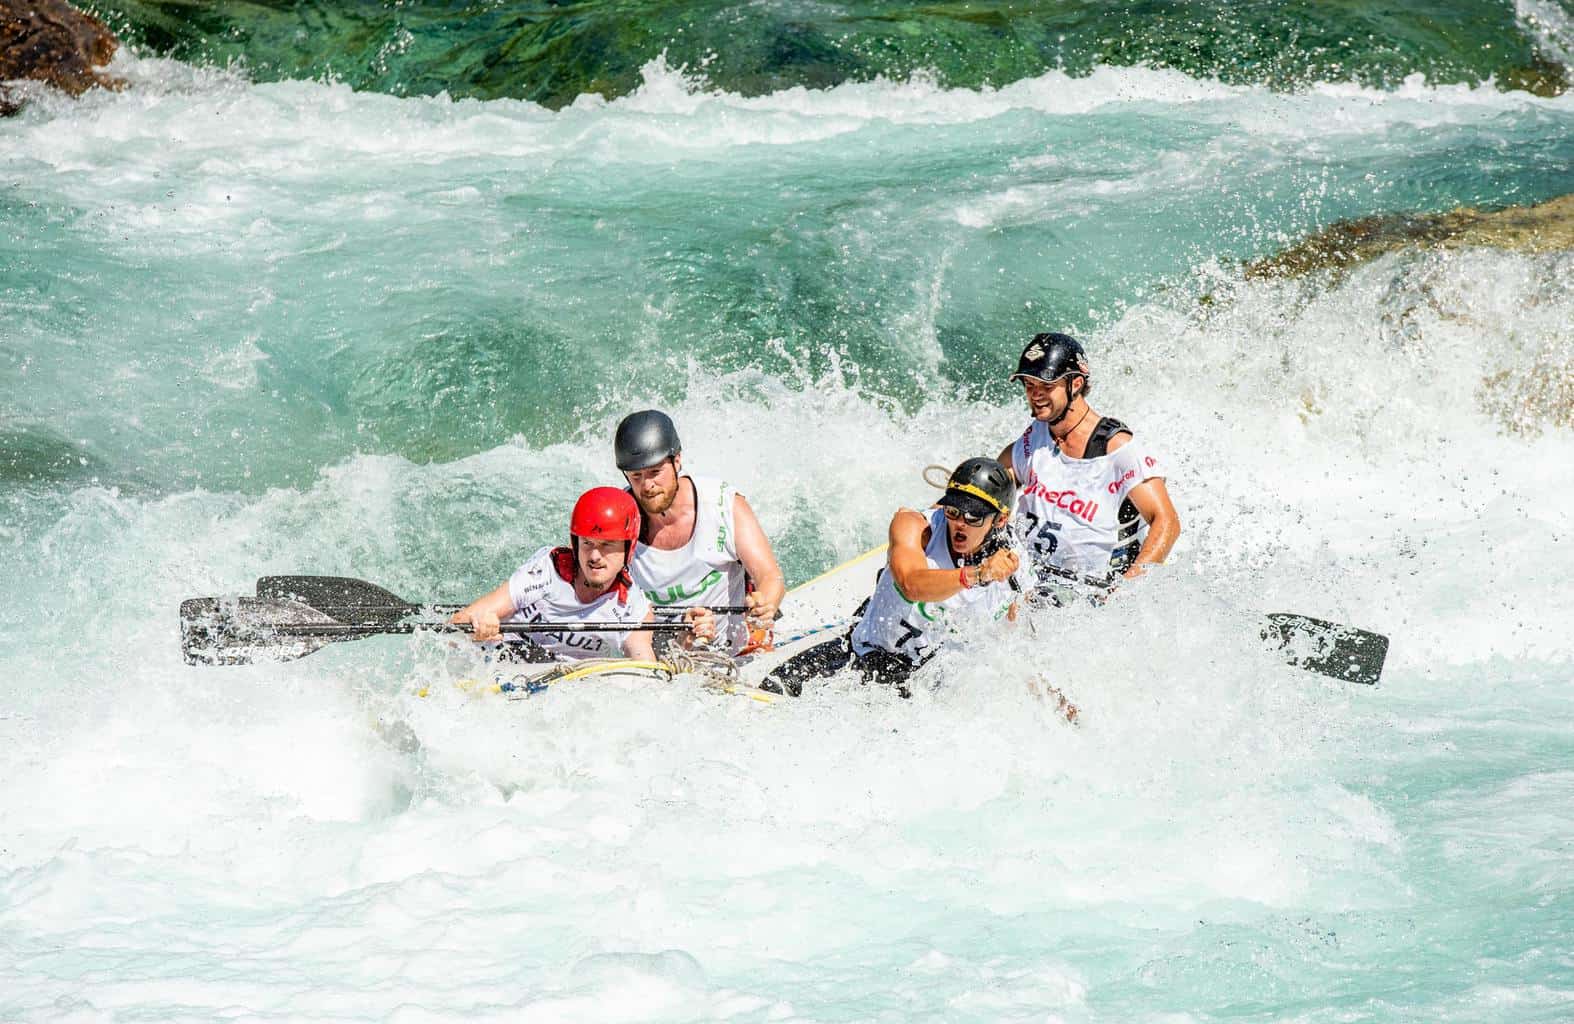 Is Kayaking an Extreme Sport? (& How to Stay Safe)